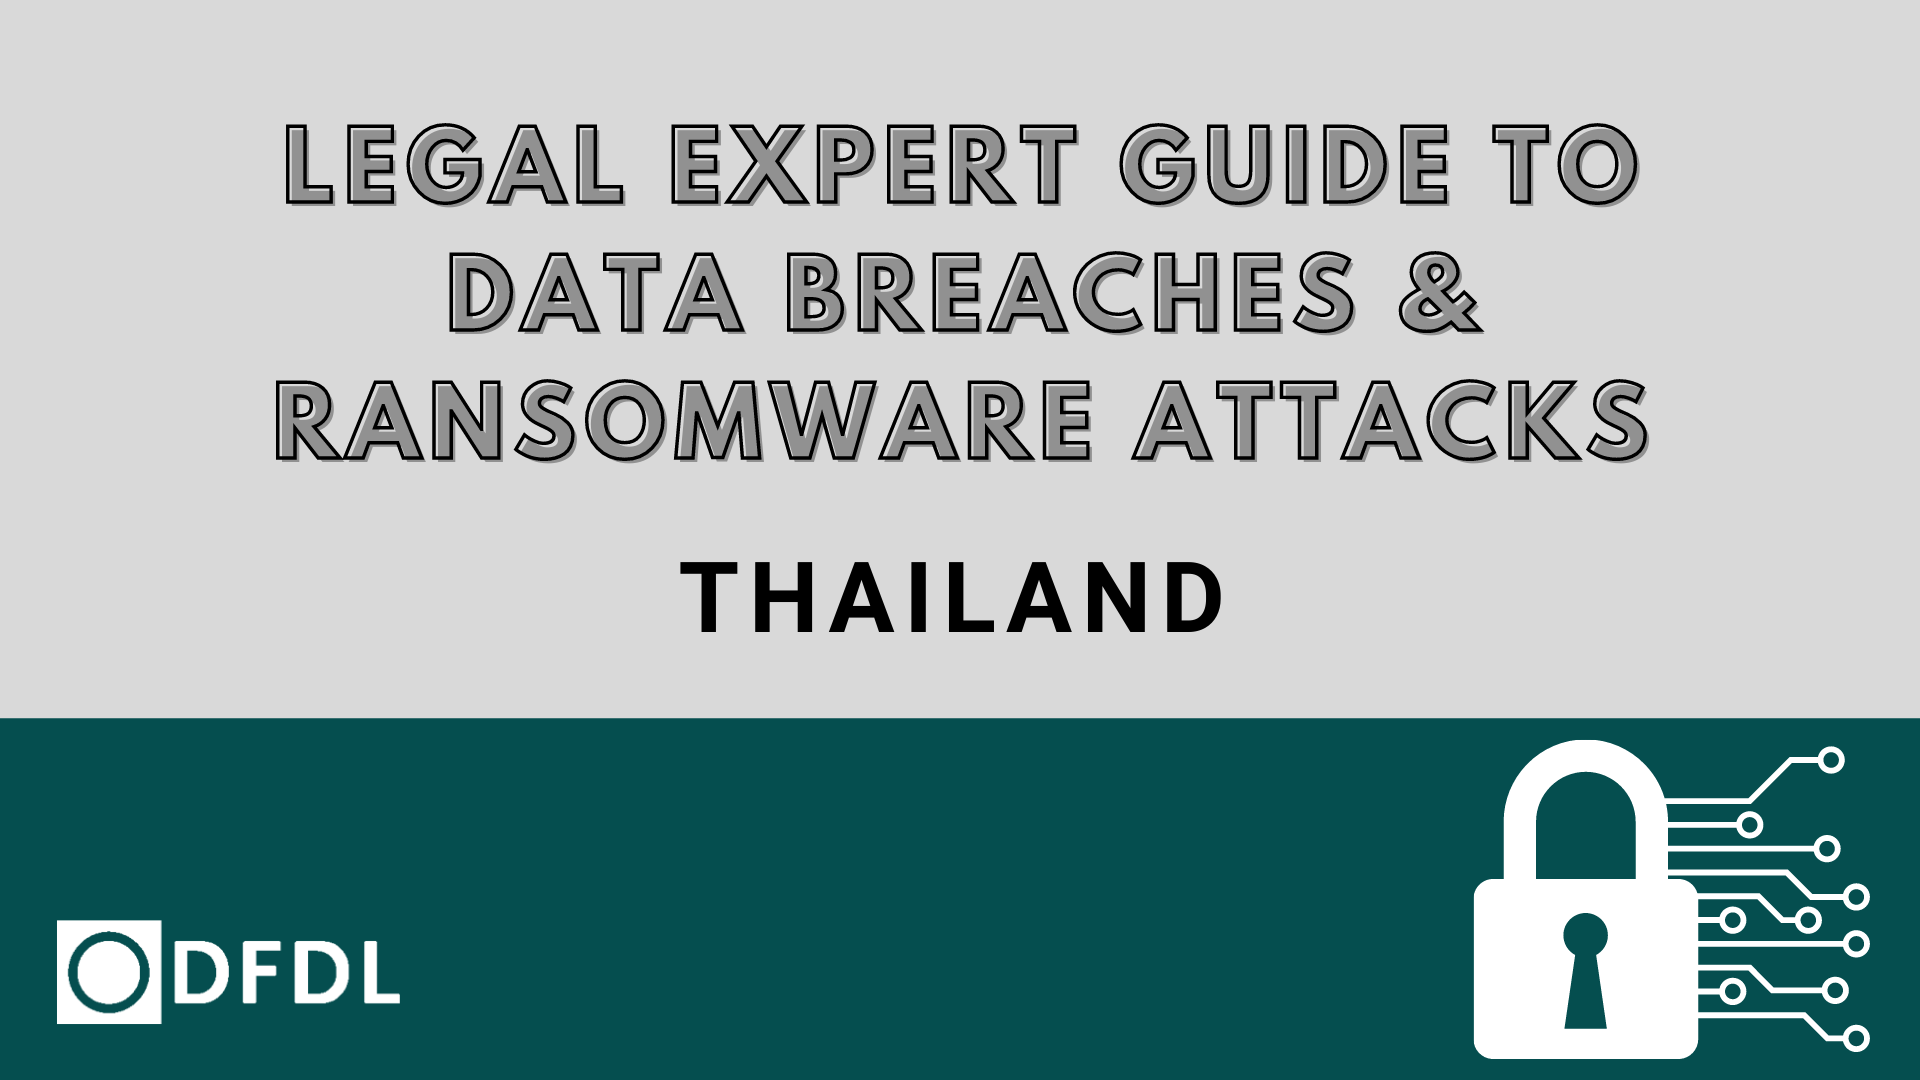 Legal Expert Guide to Data Breaches & Ransomware Attacks in Thailand